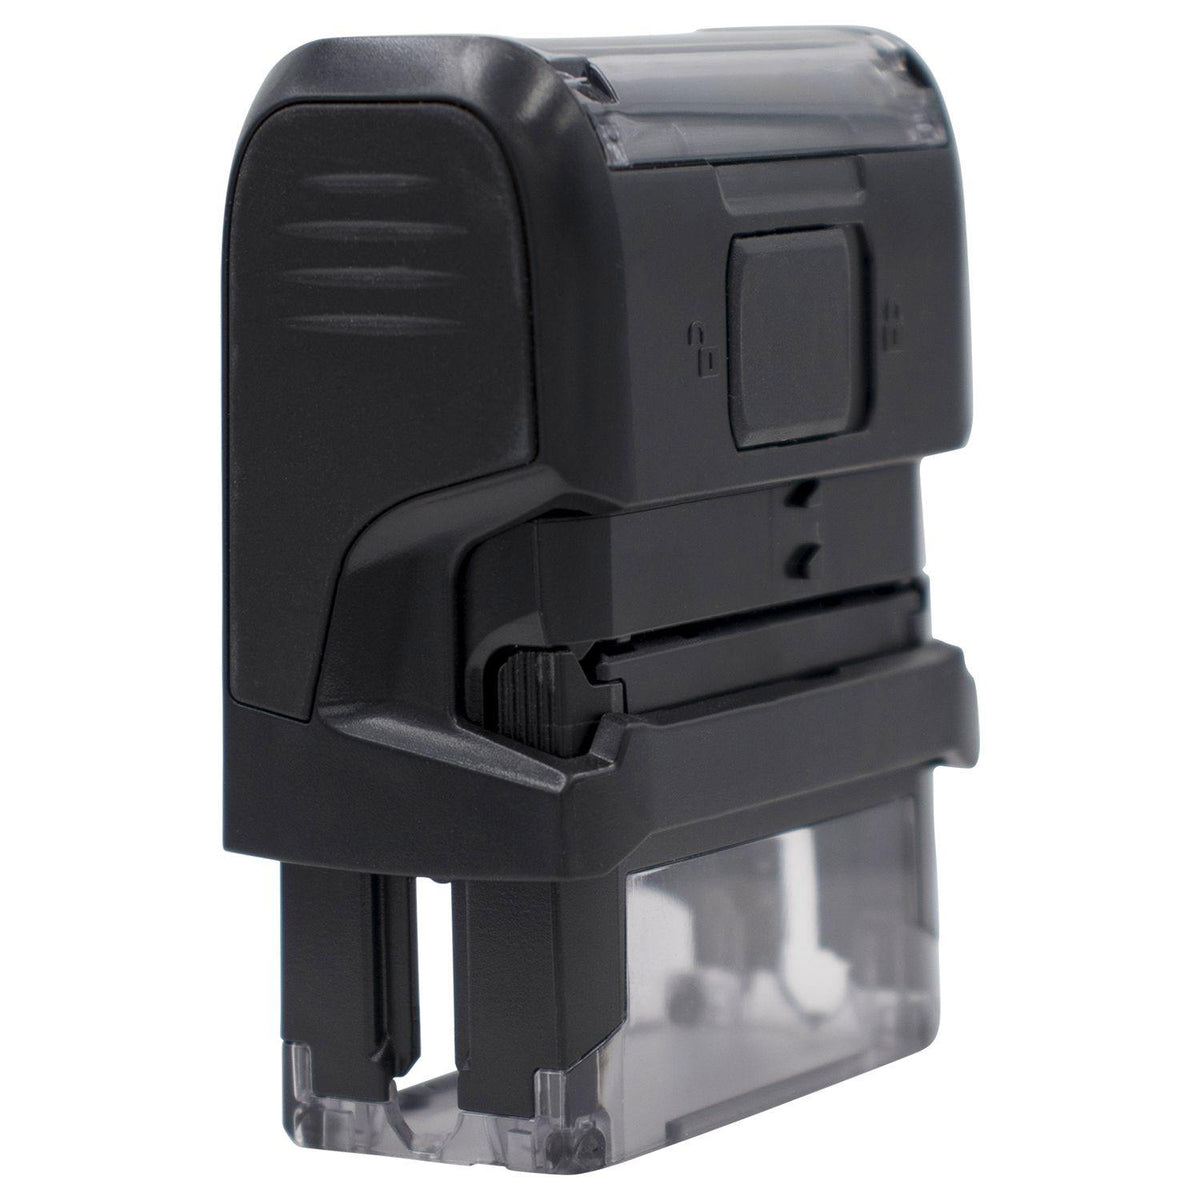 Large Self Inking Attorneys Copy Stamp Back View